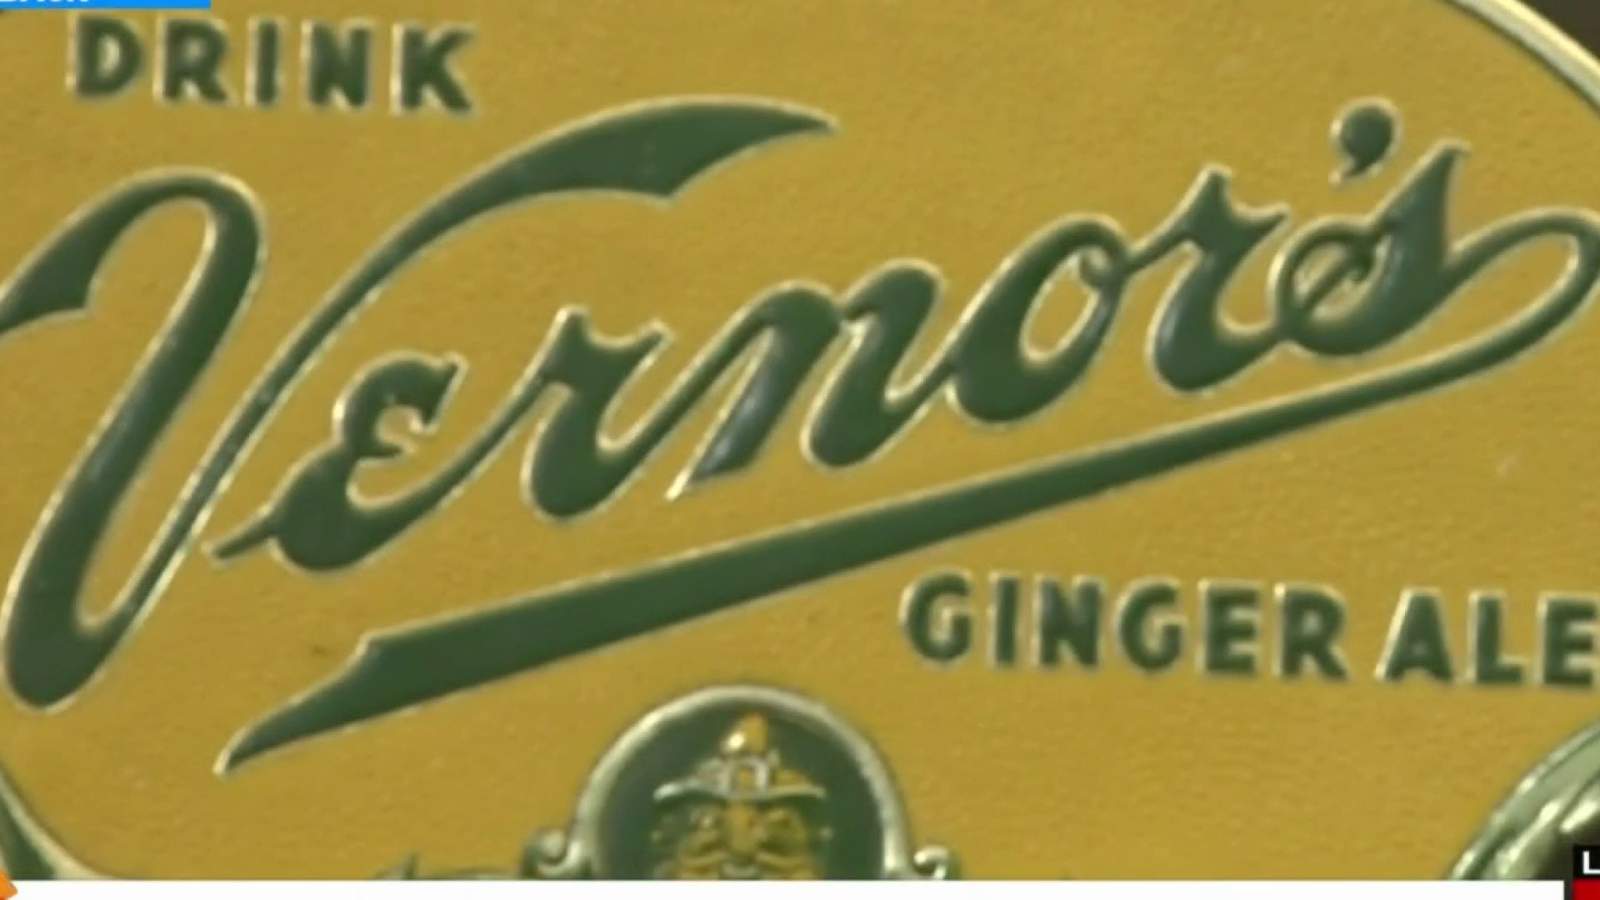 The story of Detroits favorite ginger ale